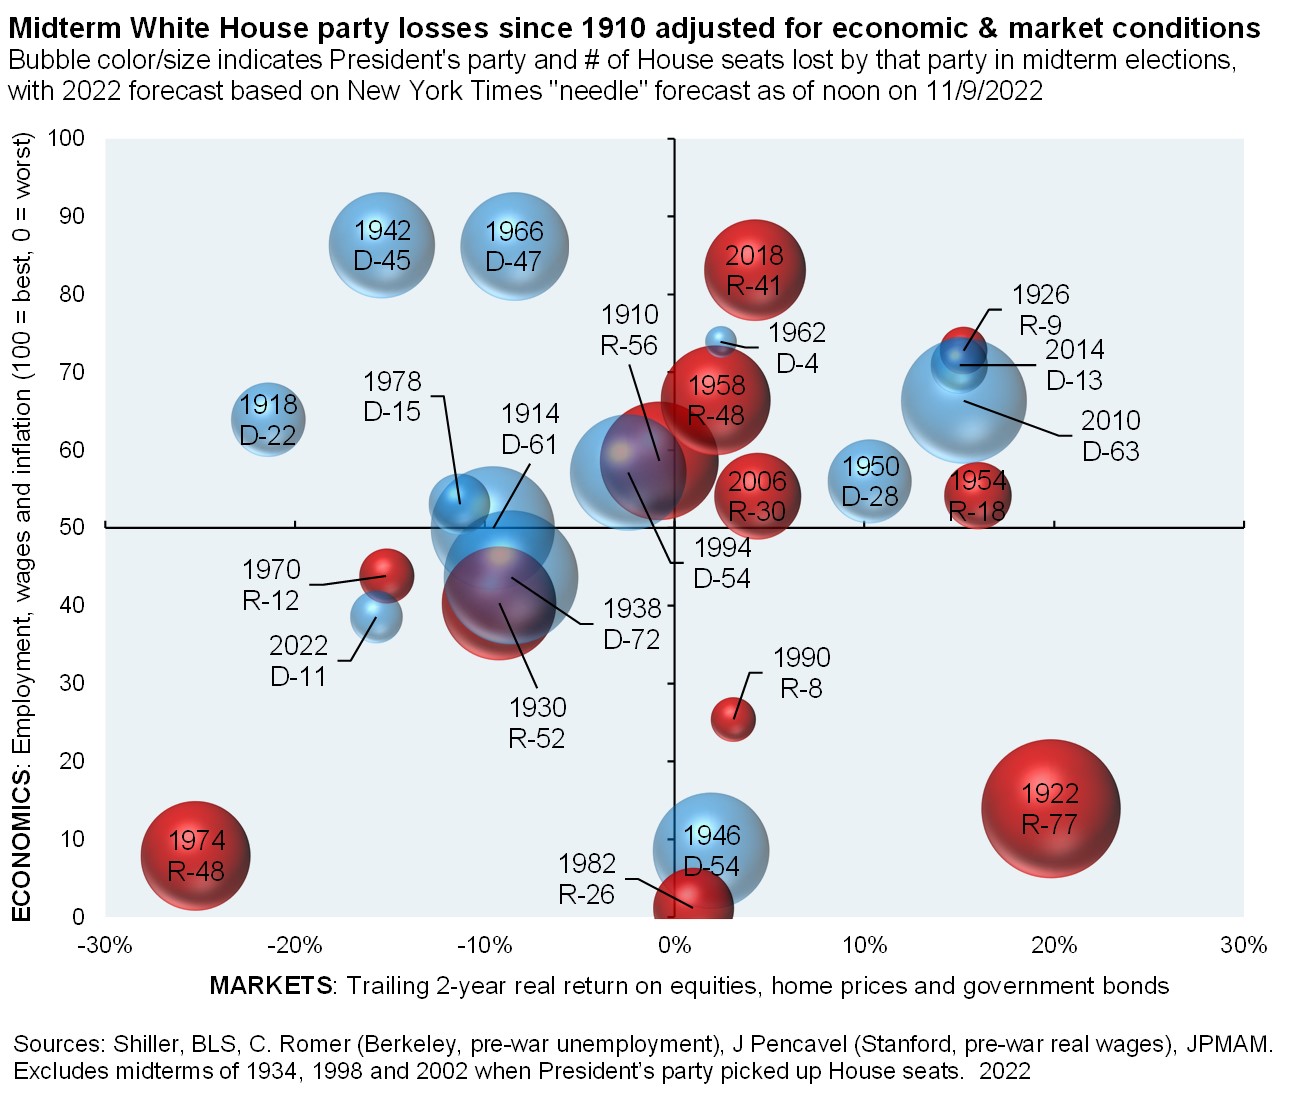 Bubble chart plots midterm election losses for the President’s party since 1910. Bubble color indicates the President’s party (Democrat = blue; GOP = red) and bubble size indicates the number of House seats lost by that party in midterm elections. The bubbles are plotted into four-quadrants based on their trailing 2-year market conditions (x-axis: based on equities, home prices and government bonds) and economic conditions (y-axis: based on employment, wages and inflation), with the top right quadrant indicating above average market and economic conditions and the bottom left quadrant indicating below average market and economic conditions. The 2022 midterm election forecast appears in the bottom left quadrant; given such conditions, the forecasted loss of 11 Democratic seats in the House is better than expected.